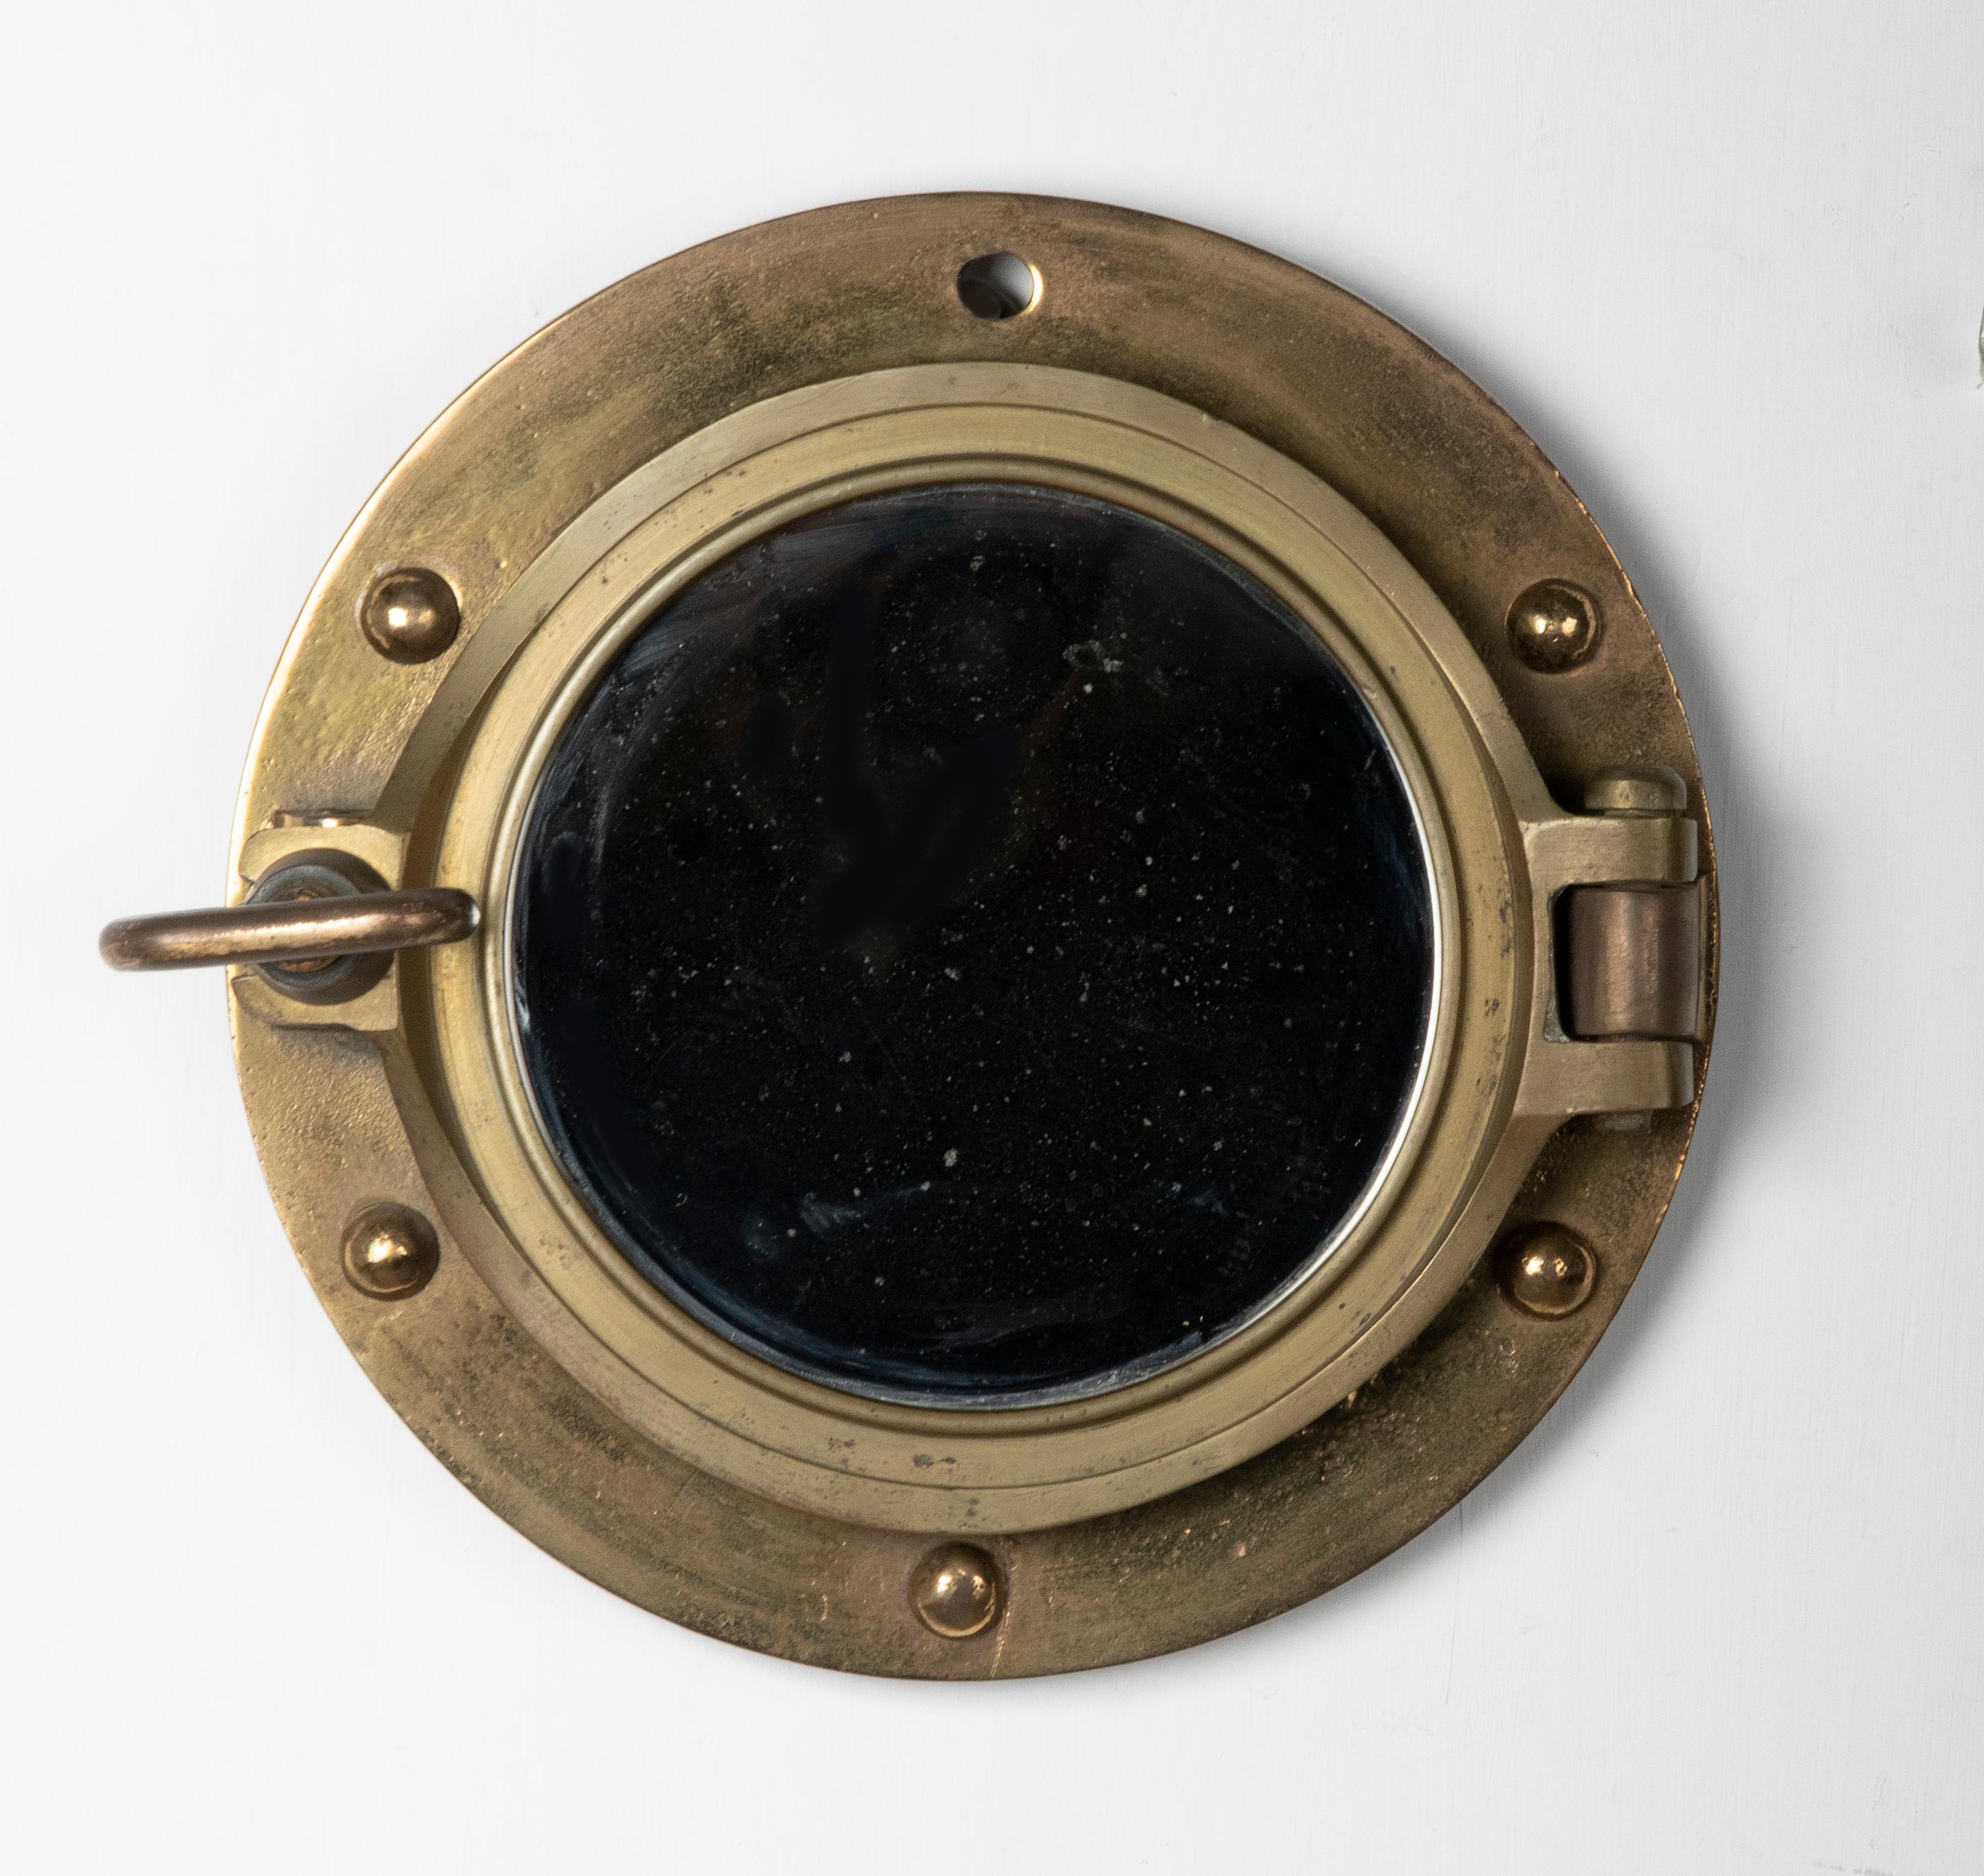 An antique ship porthole wall mirror made of brass. A mirror glass has been placed inside. The whole has a beautiful old patina. This maritime object was made around 1900-1930, origin unknown. The original bolt at the top is missing

The